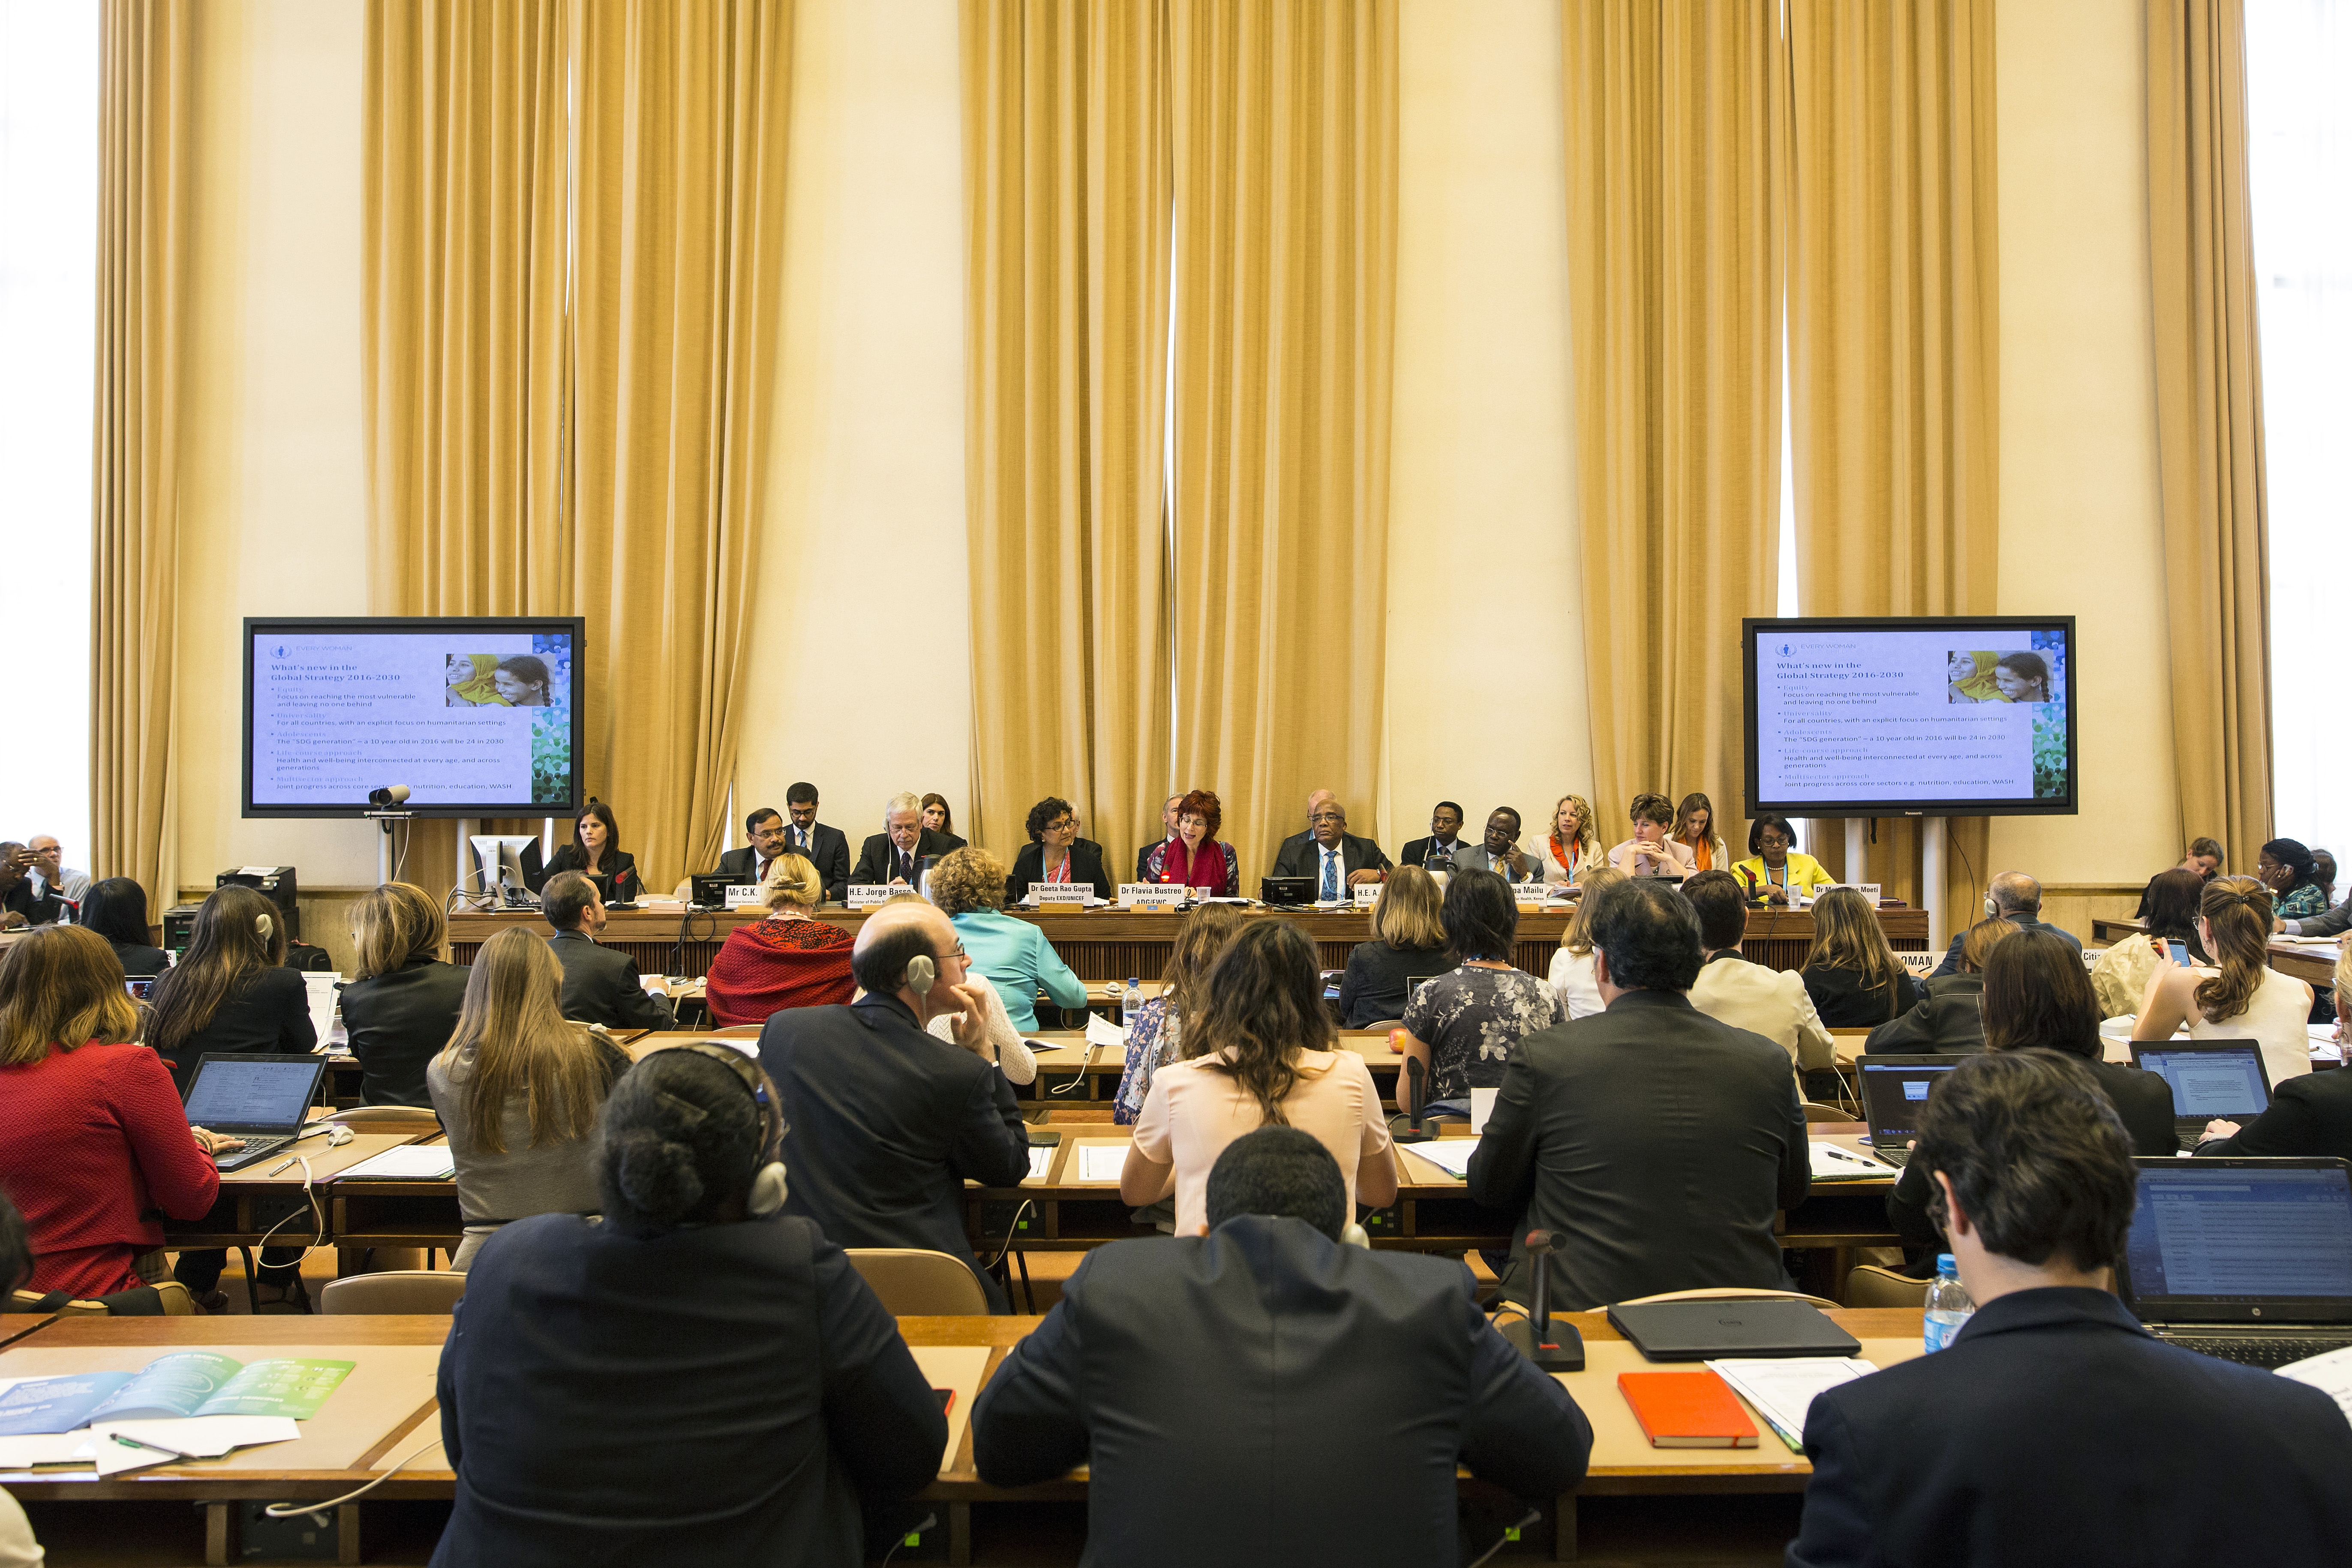 Decisions made at the World Health Assembly help advance the nutrition agenda